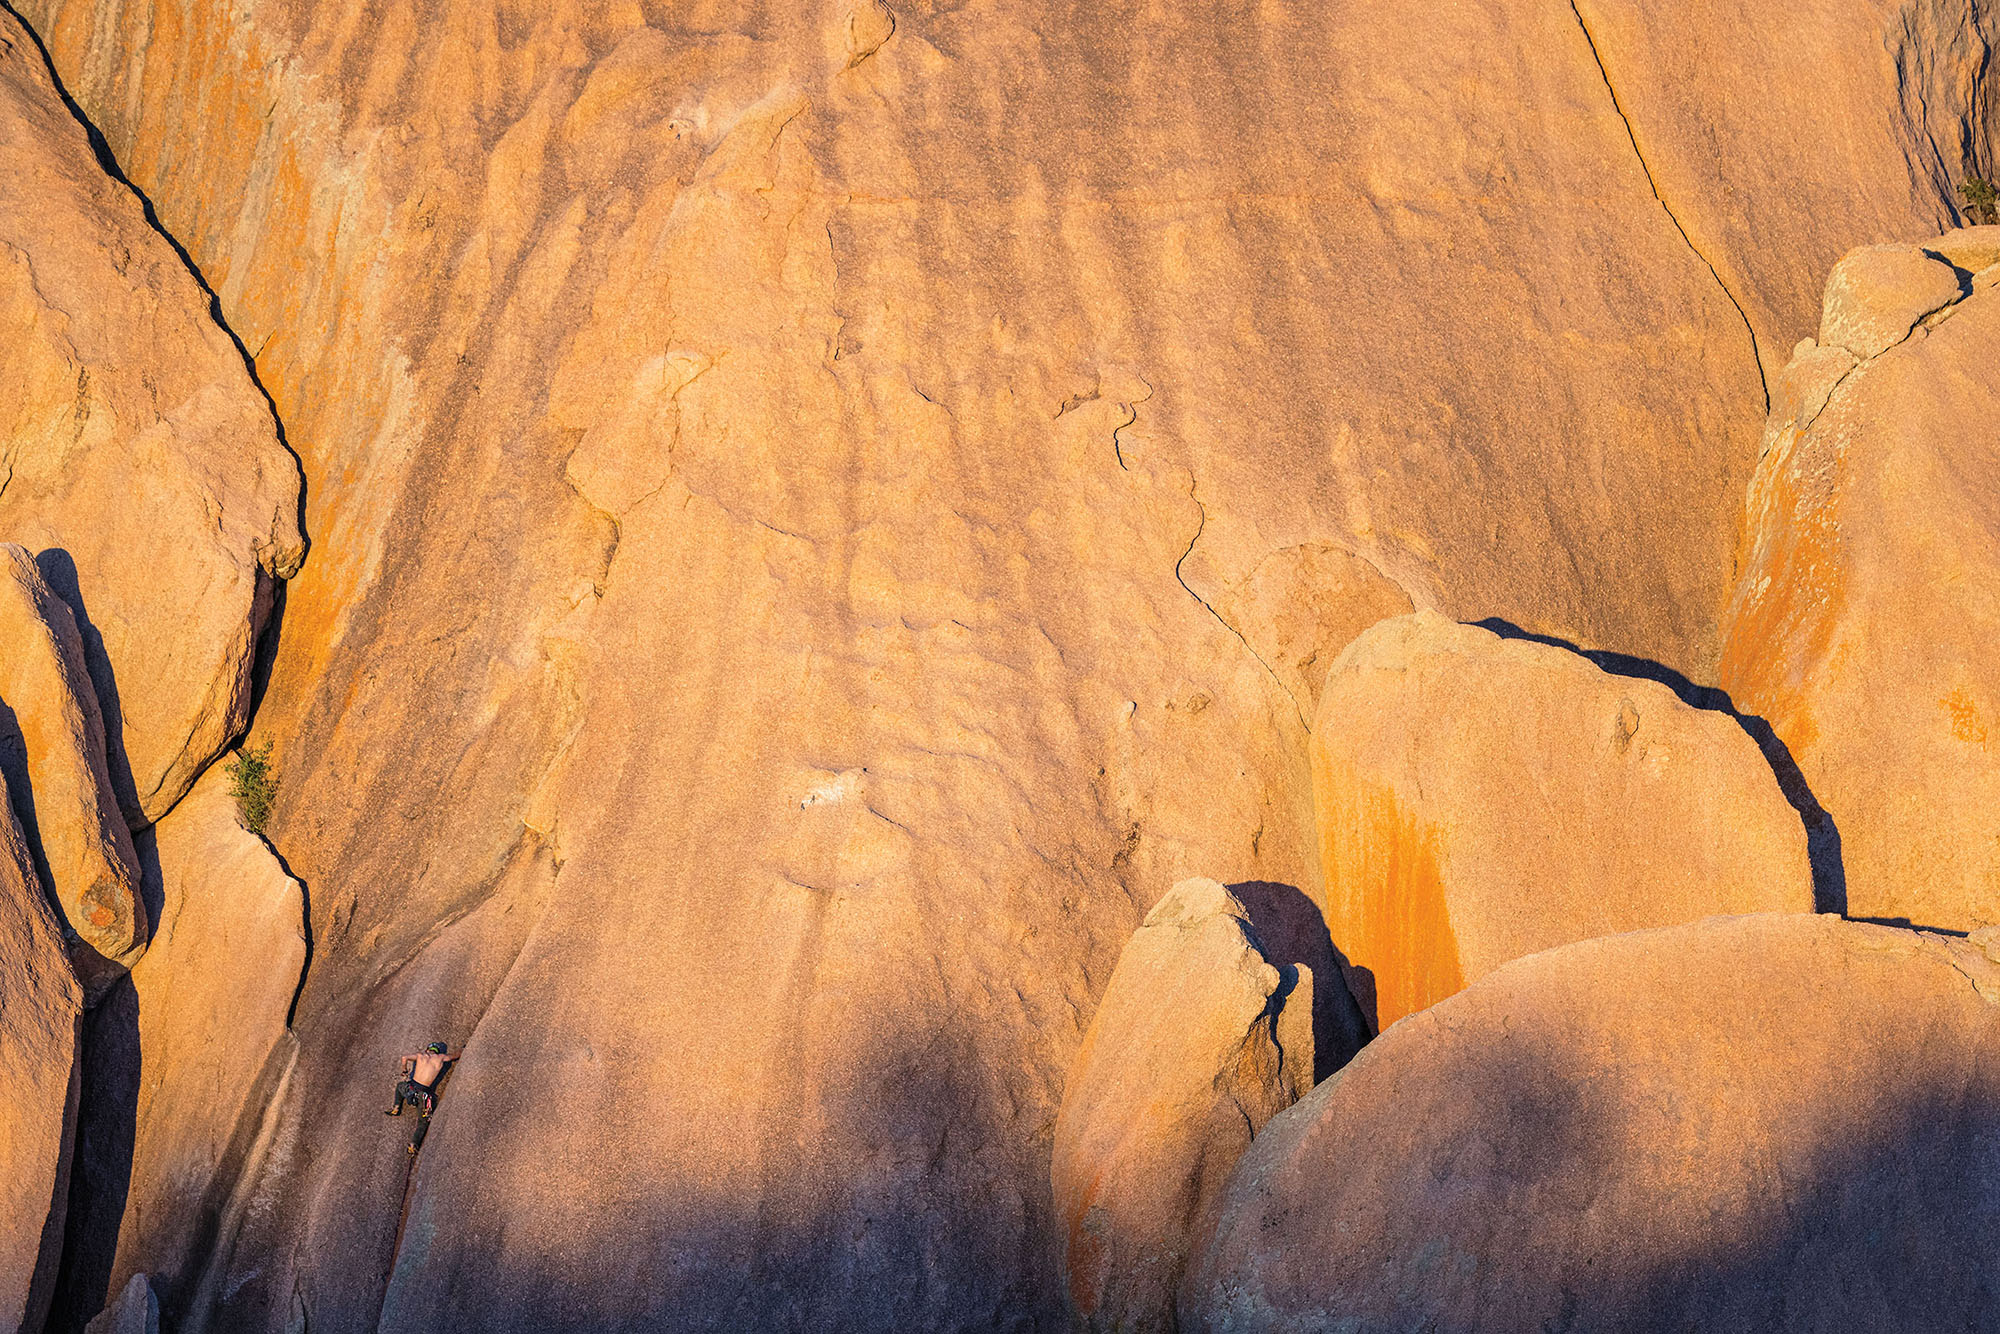 A climber makes their way up a sheer rock face with a few shadows bathed in golden afternoon light